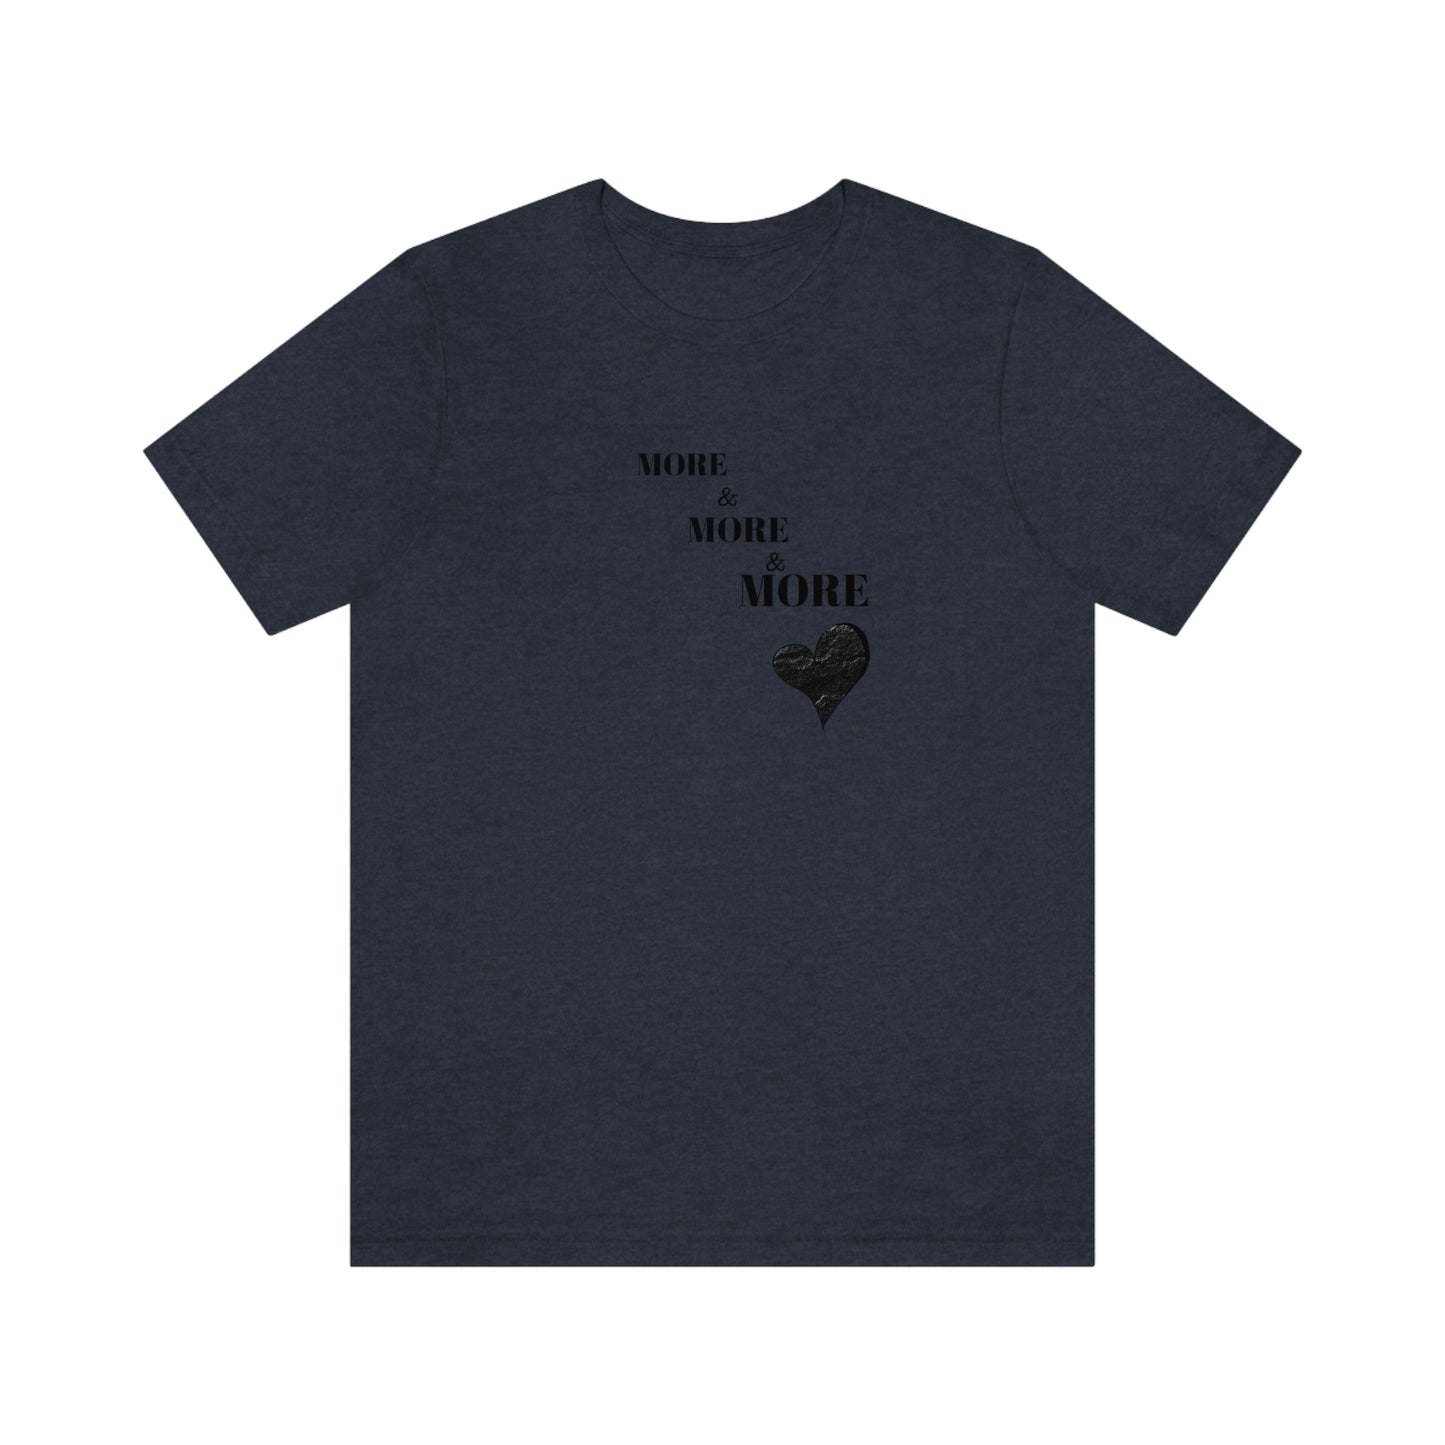 More and more and more love t shirt gift, t shirt gift for love, T shirt gift that celebrates love